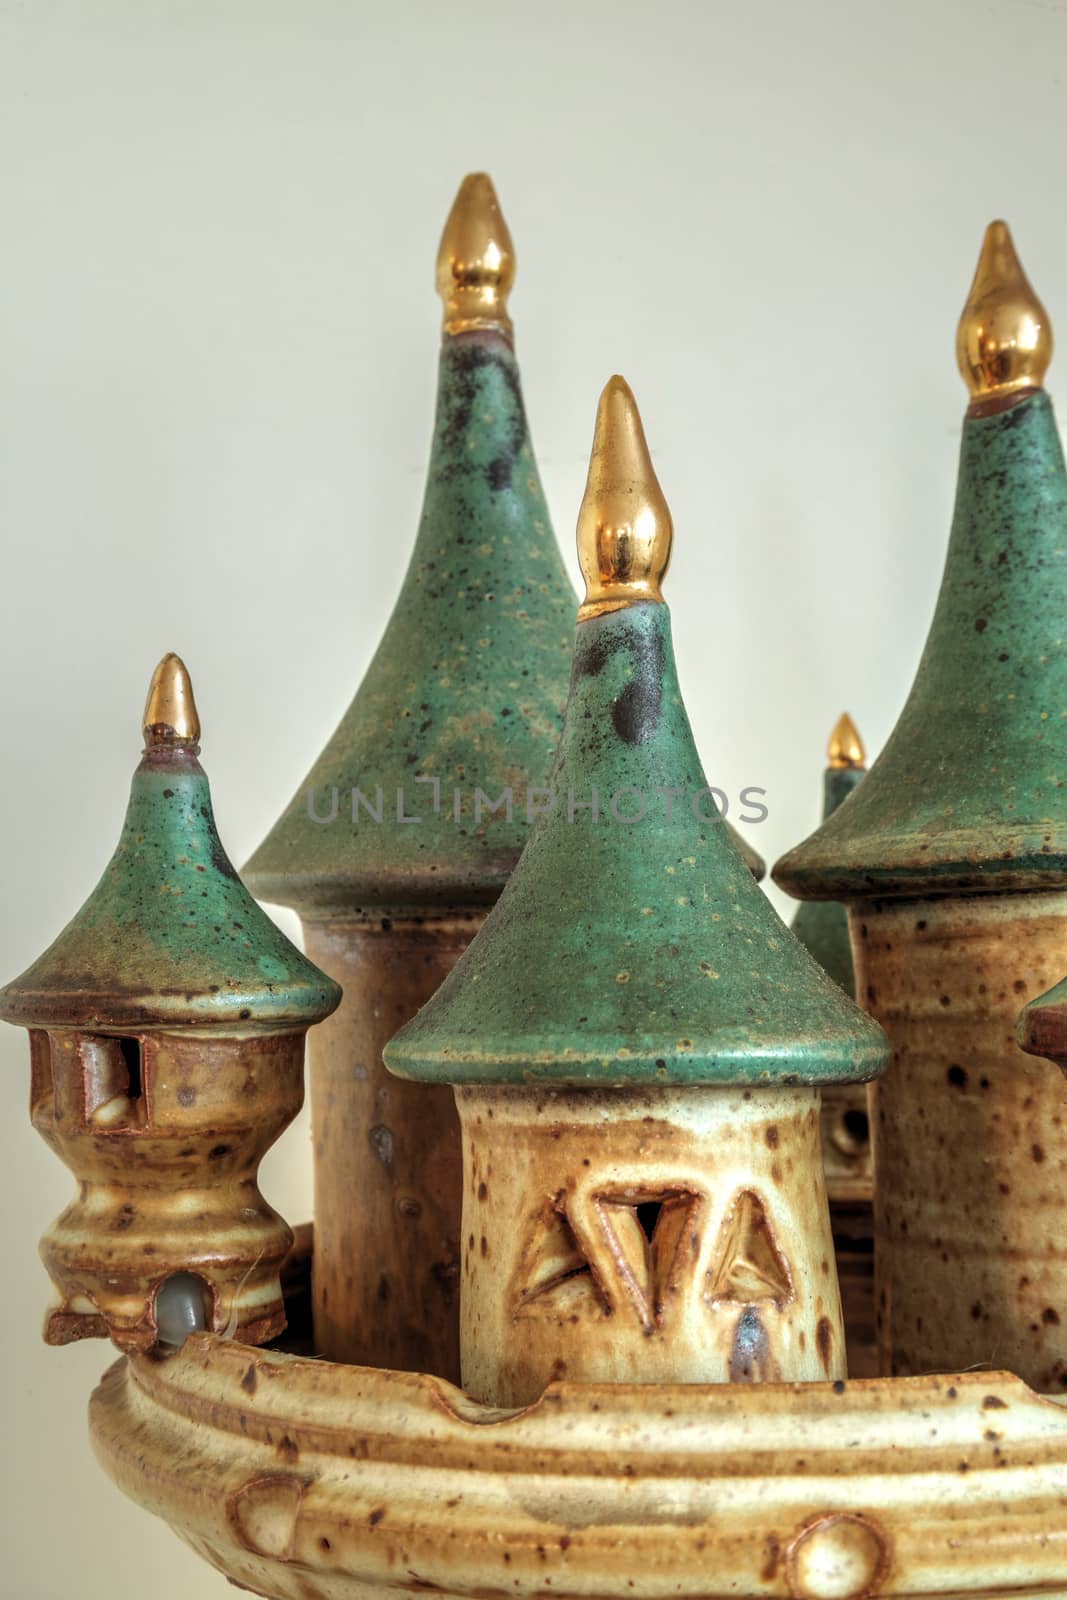 Pottery castle with turrets tipped in gold against a white background.